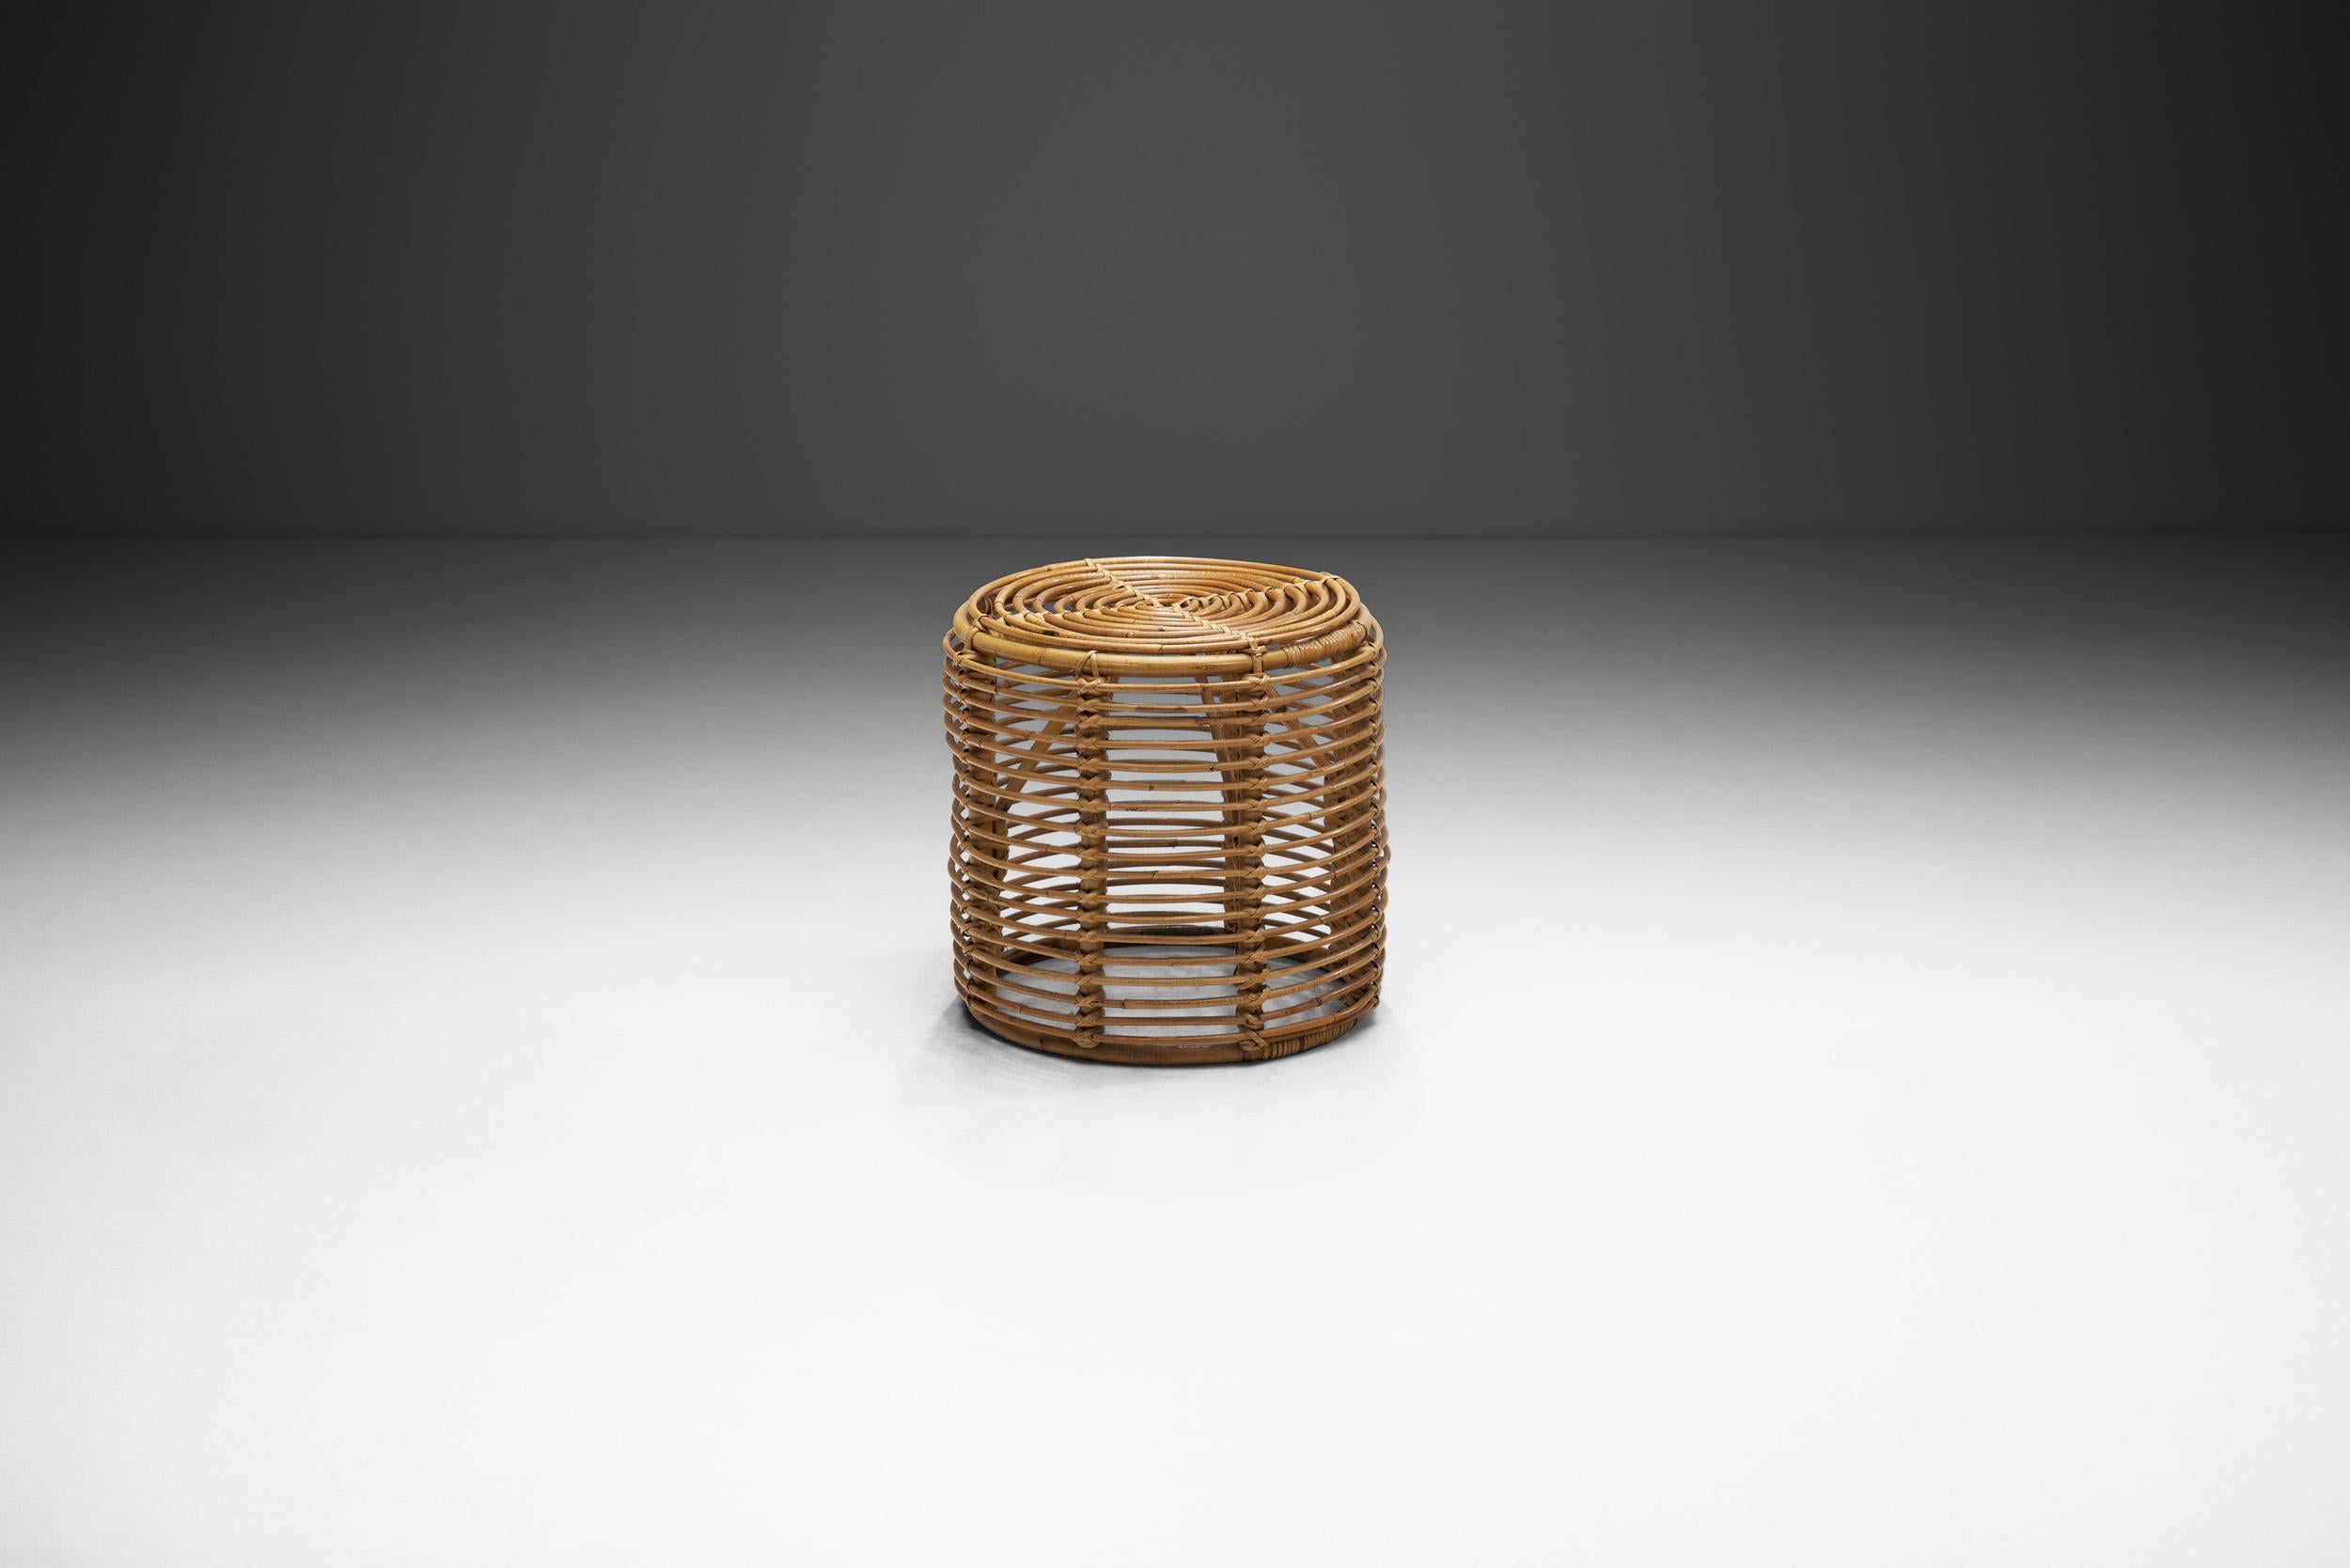 Form and function collide in this stool, a piece of furniture that is often underestimated. Designers define stools as jewels and statements in a space, and taking practicality into account, this bamboo and wicker stool is perfect to add visual